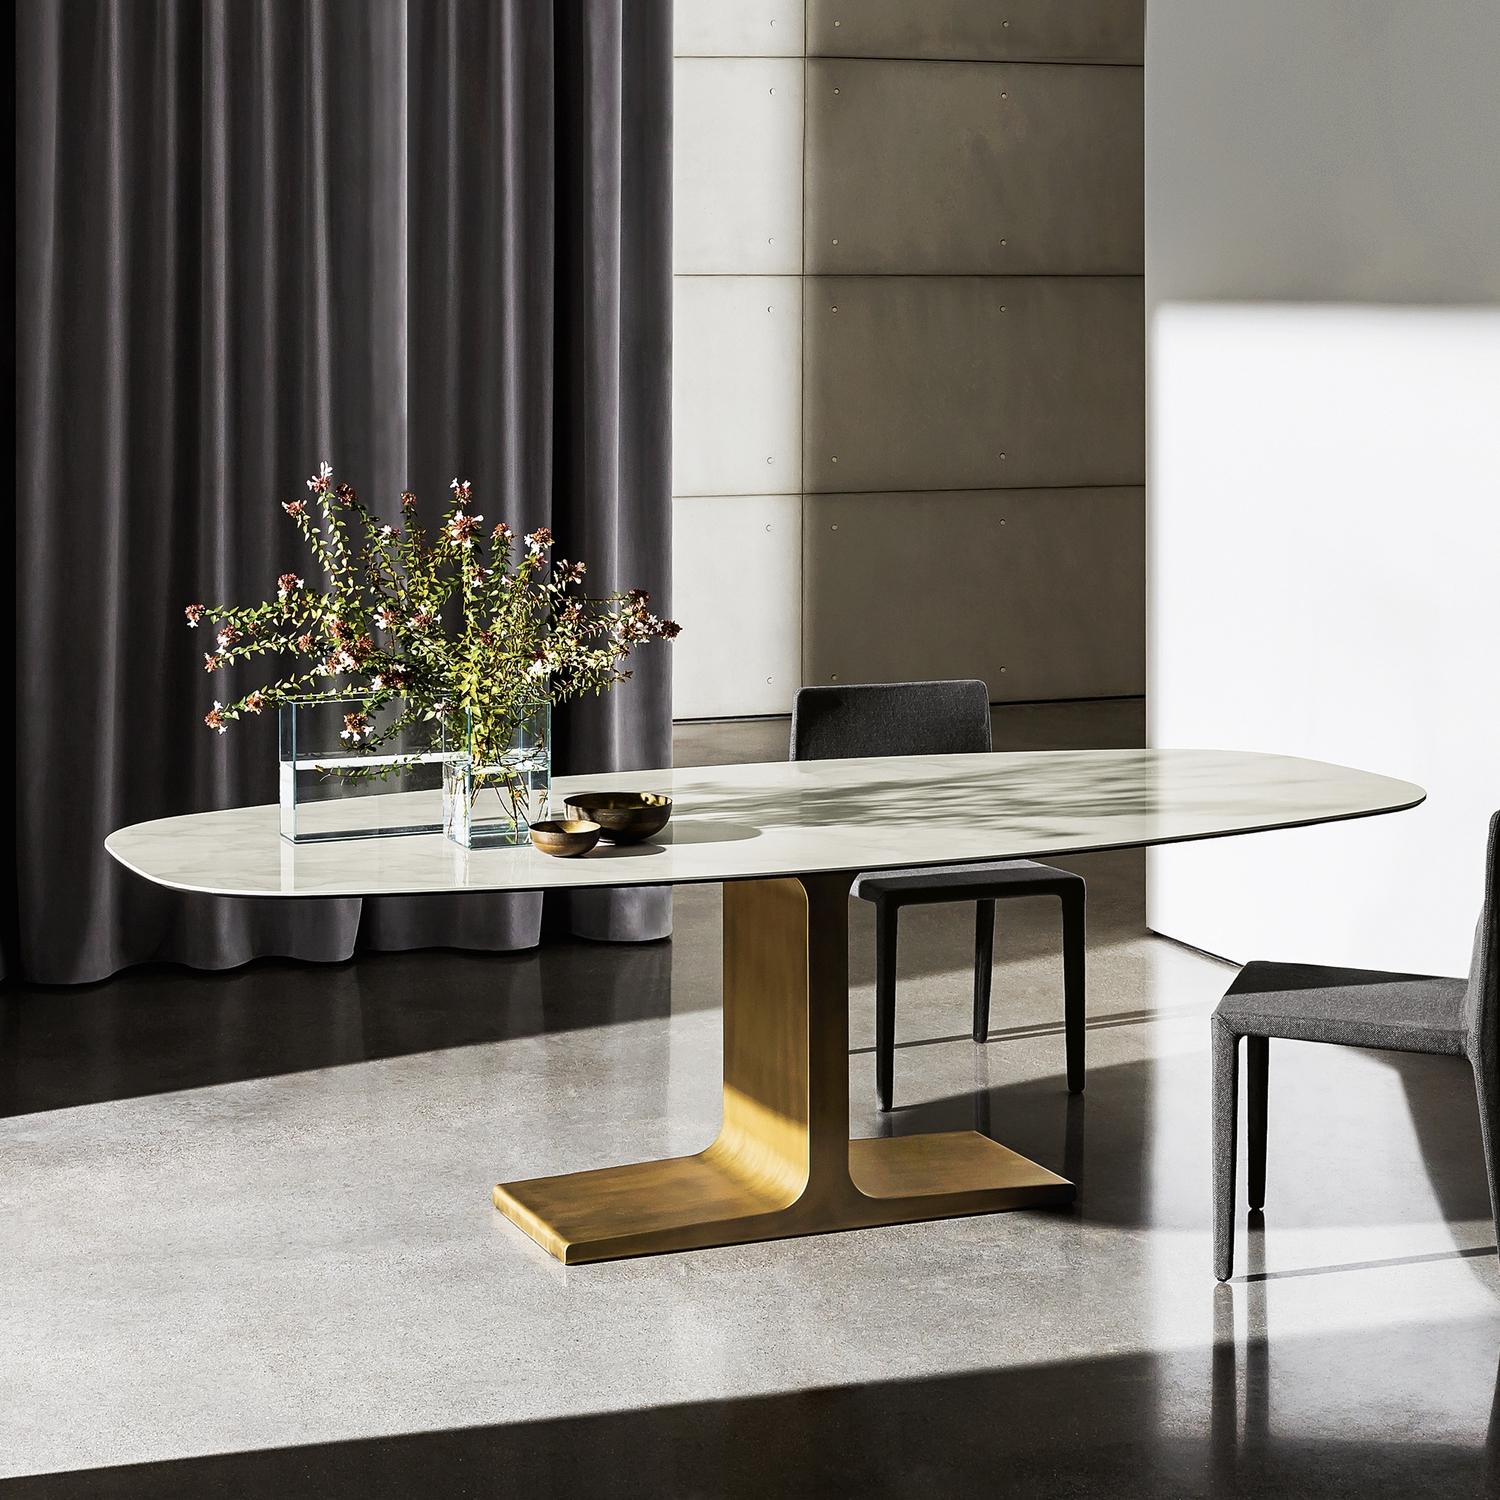 Modern In Stock in Los Angeles, Brass and Ceramic Dining Table, Lievore Altherr Molina